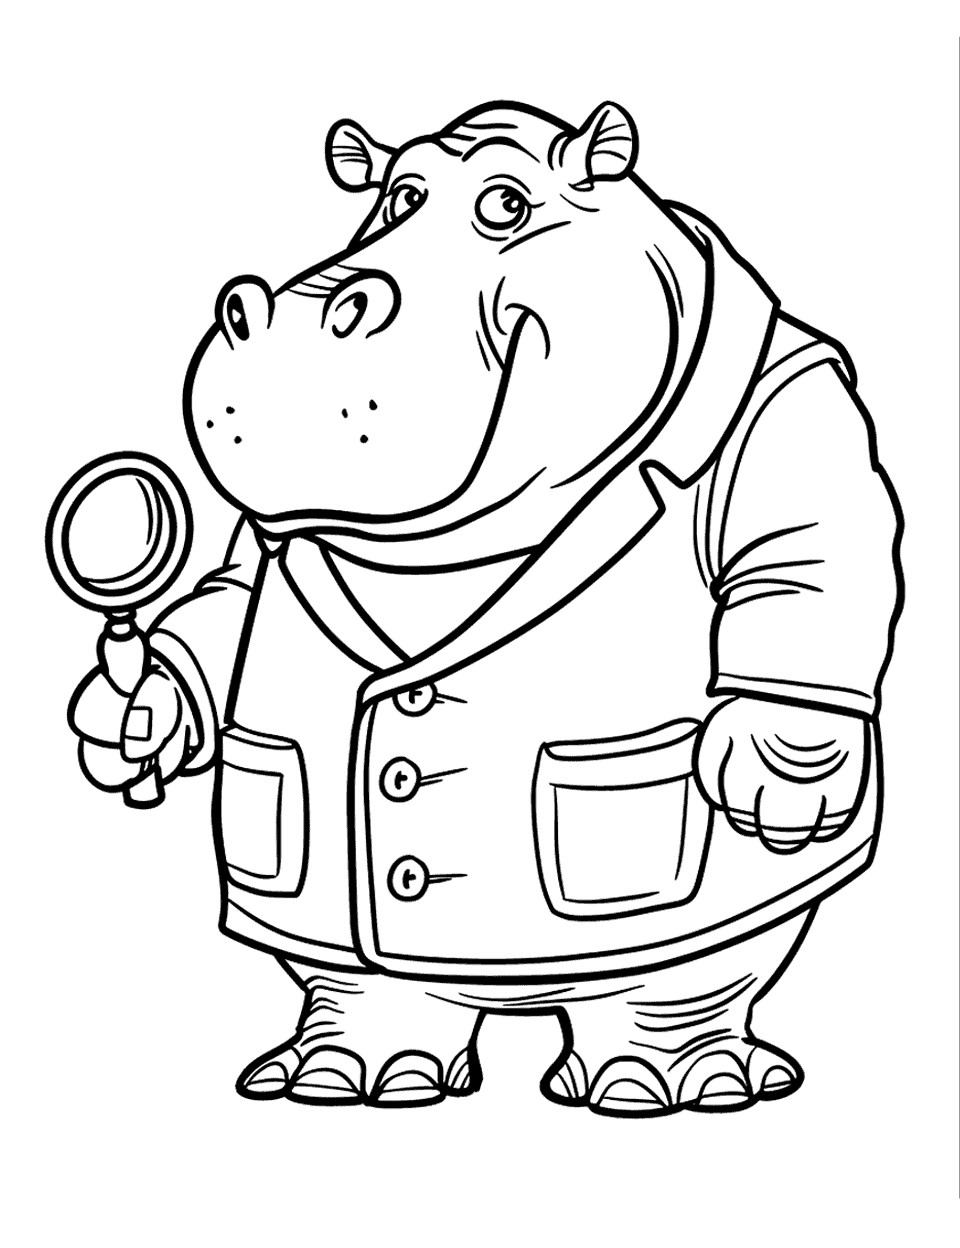 Hippo Detective Coloring Page - A detective hippo wearing a trench coat and magnifying glass, solving mysteries.